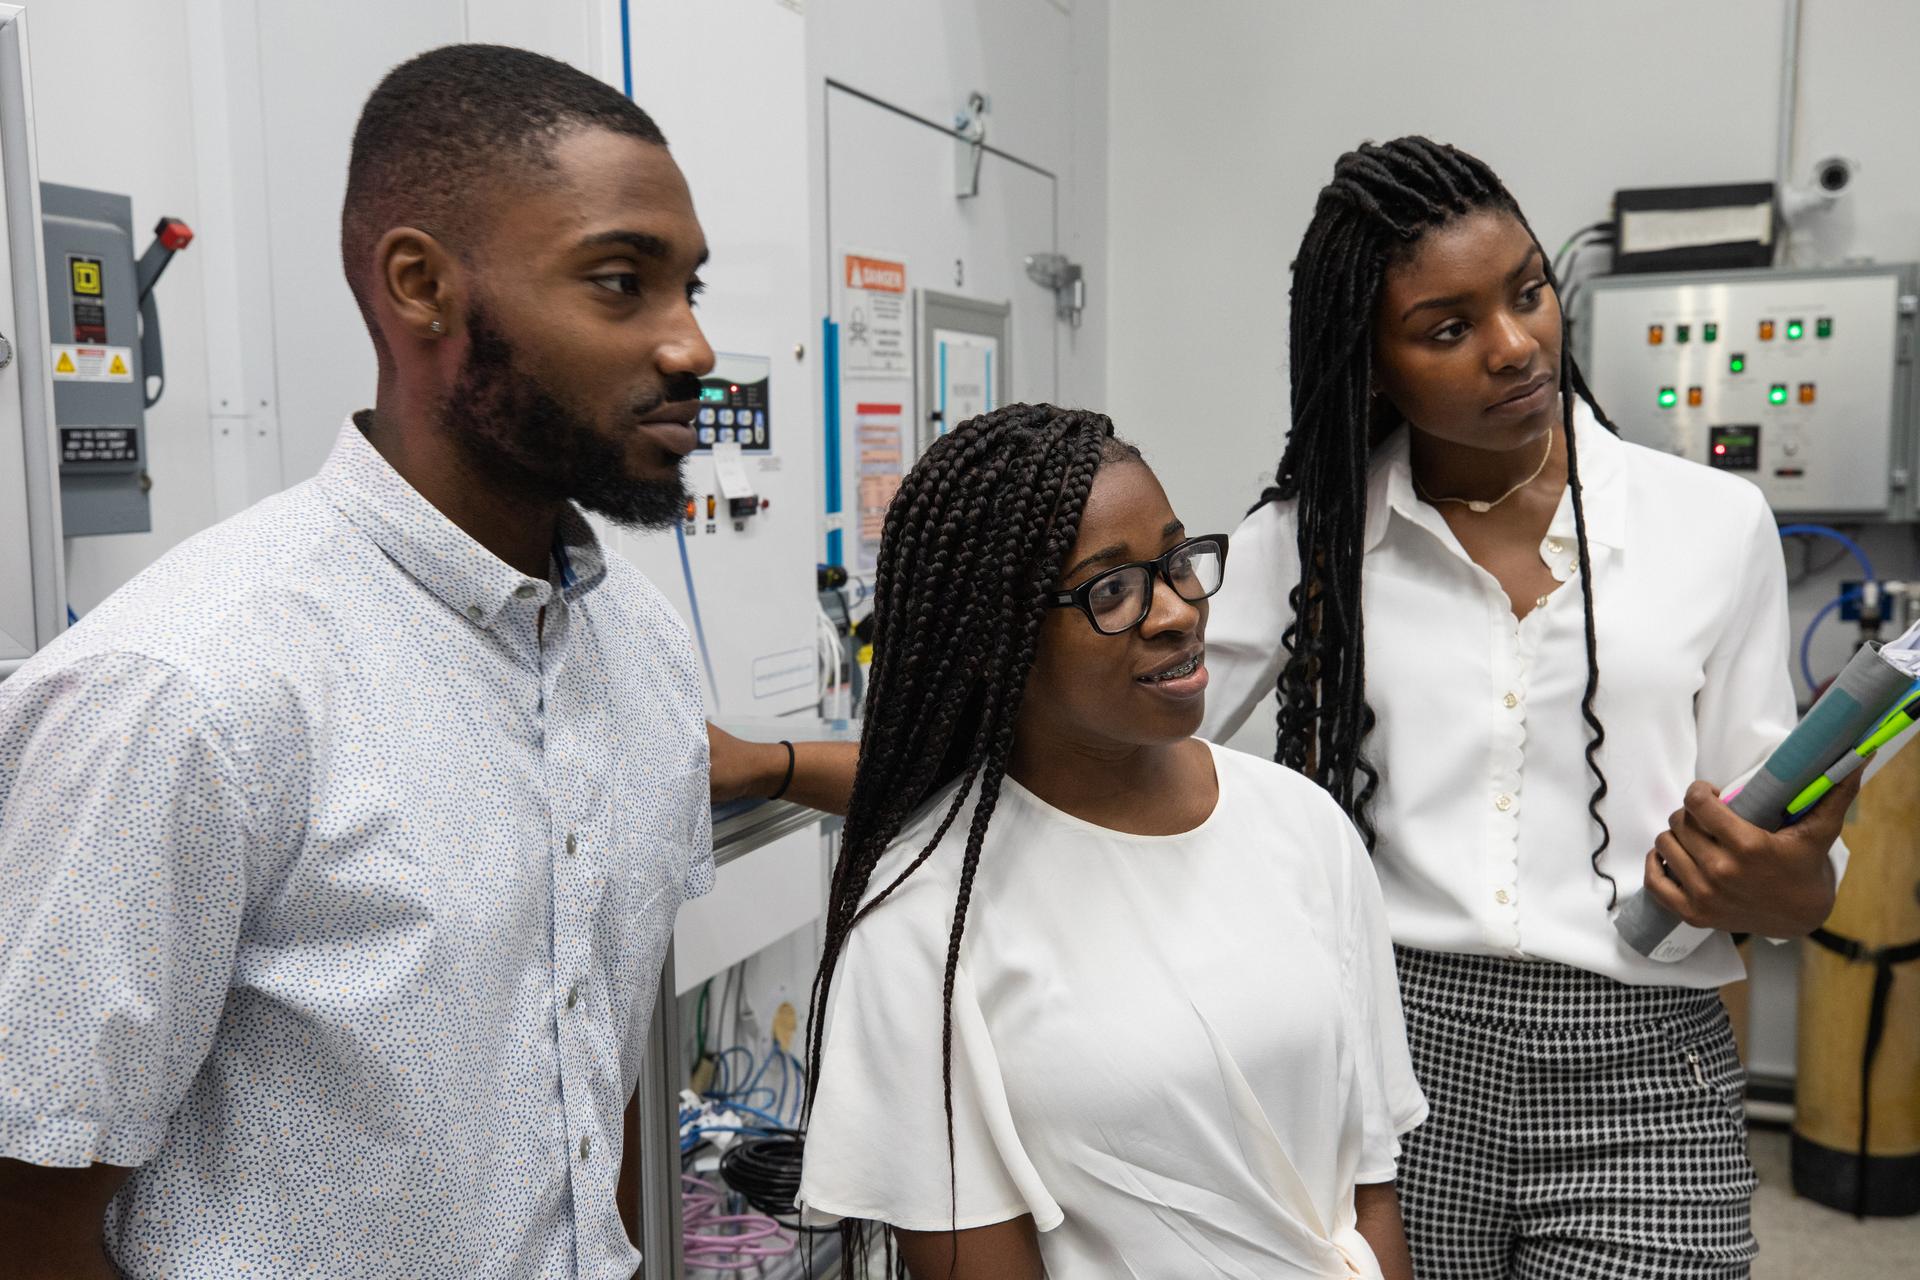 NASA awards 11.7 million to HBCUs to conduct data science research that will contribute to the agency’s Science Mission Directorate missions.